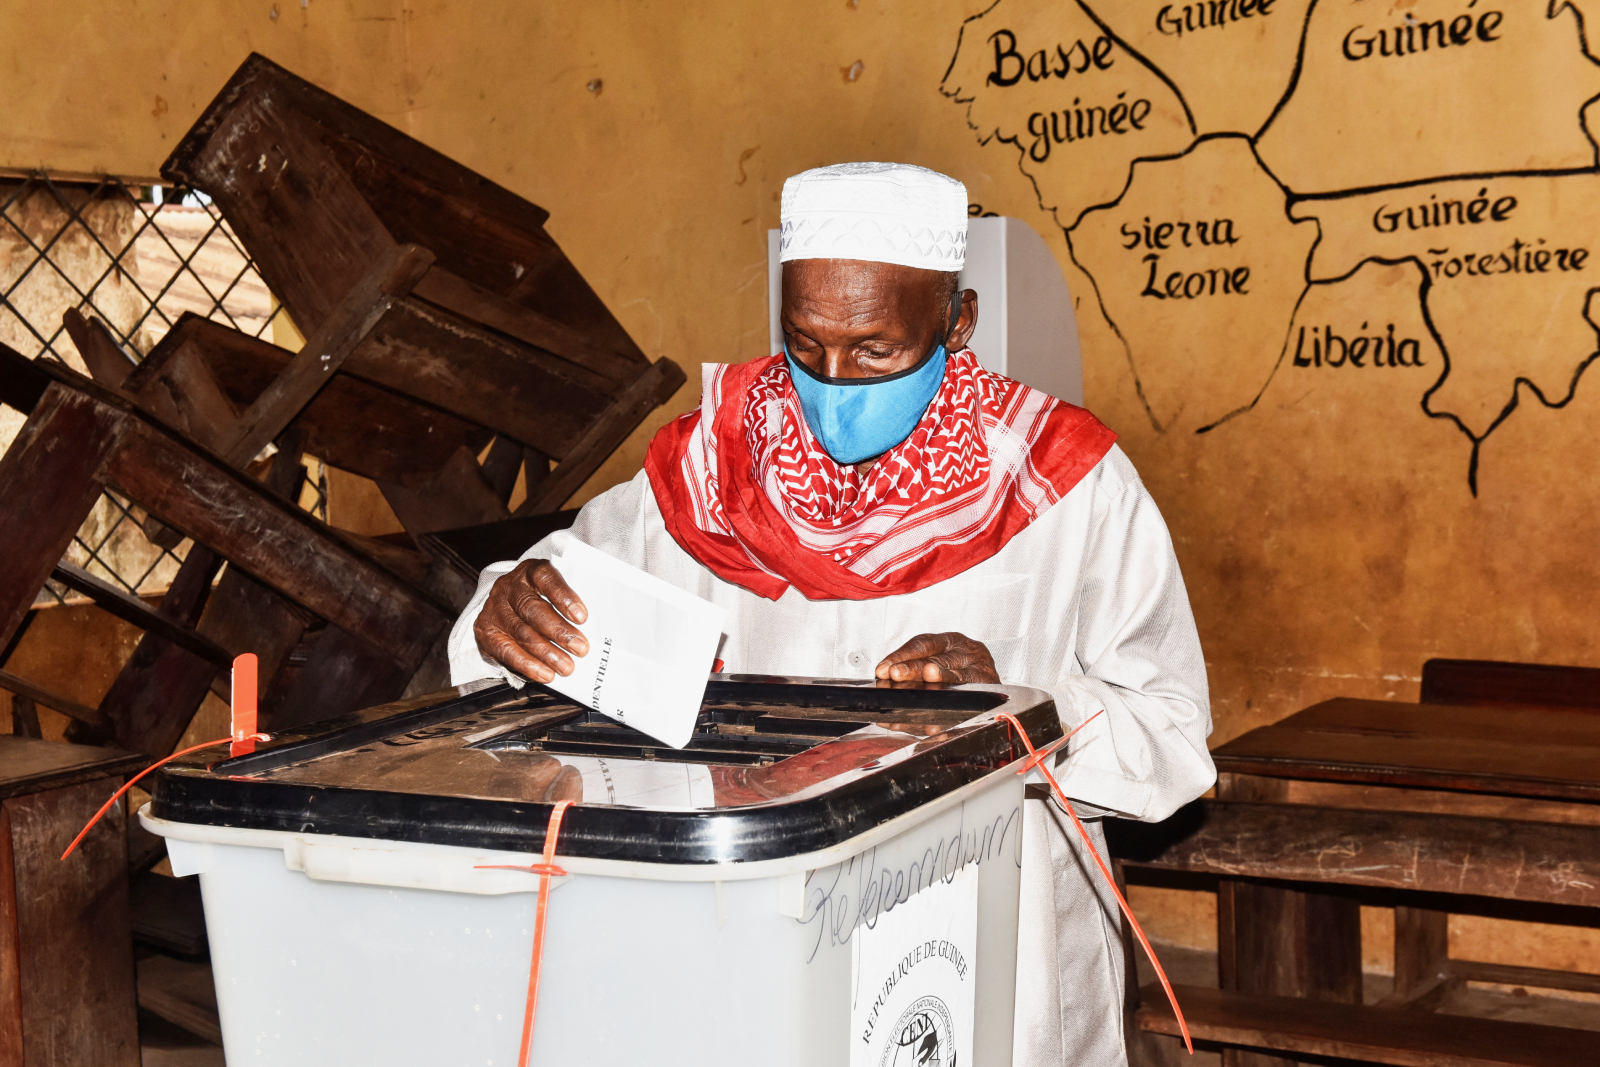 A polling station in Conakry during the Guinea presidential elections.